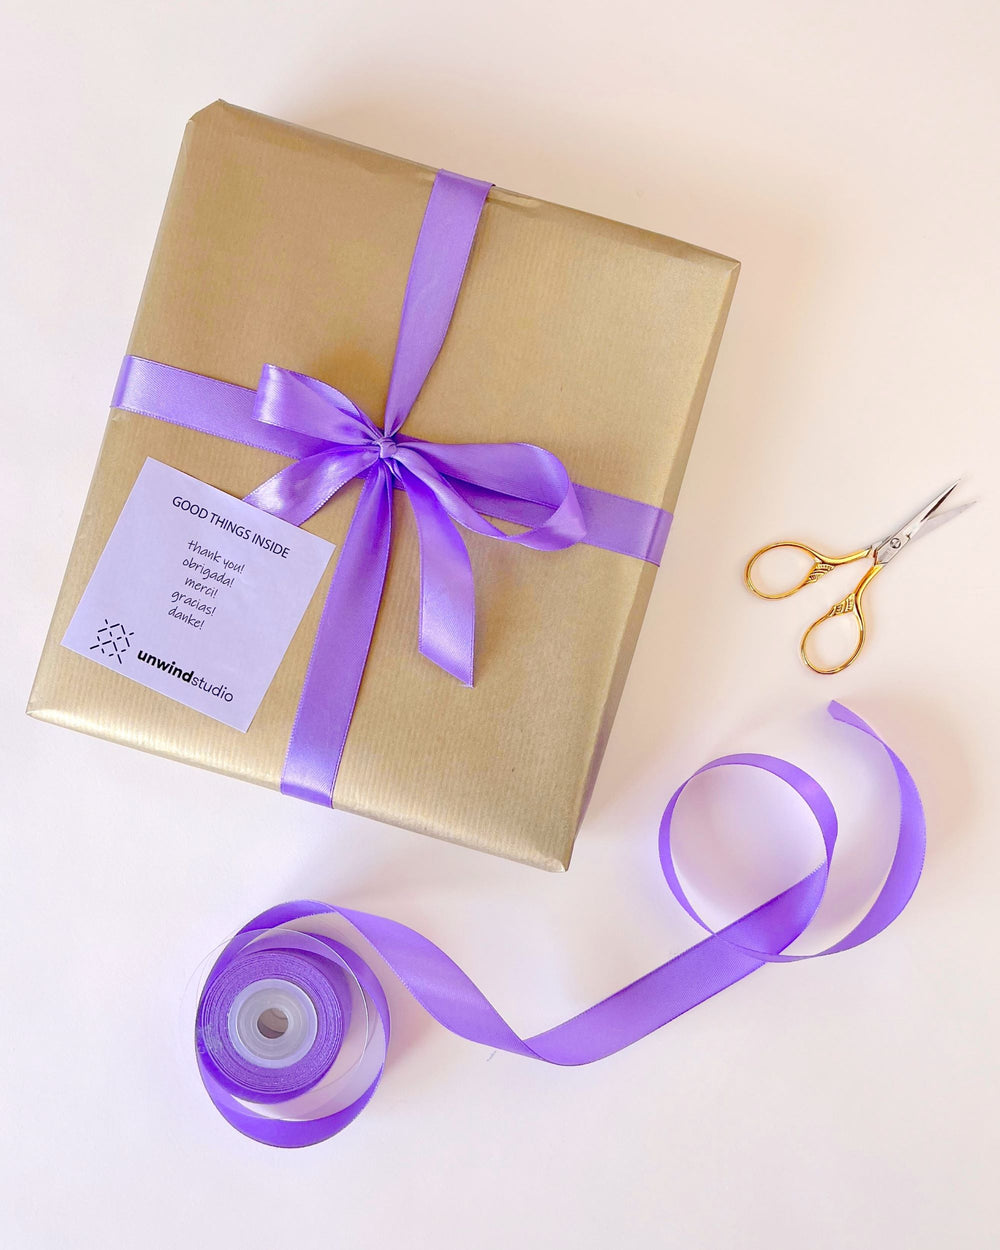 Gift Wrapping by Unwind Studio